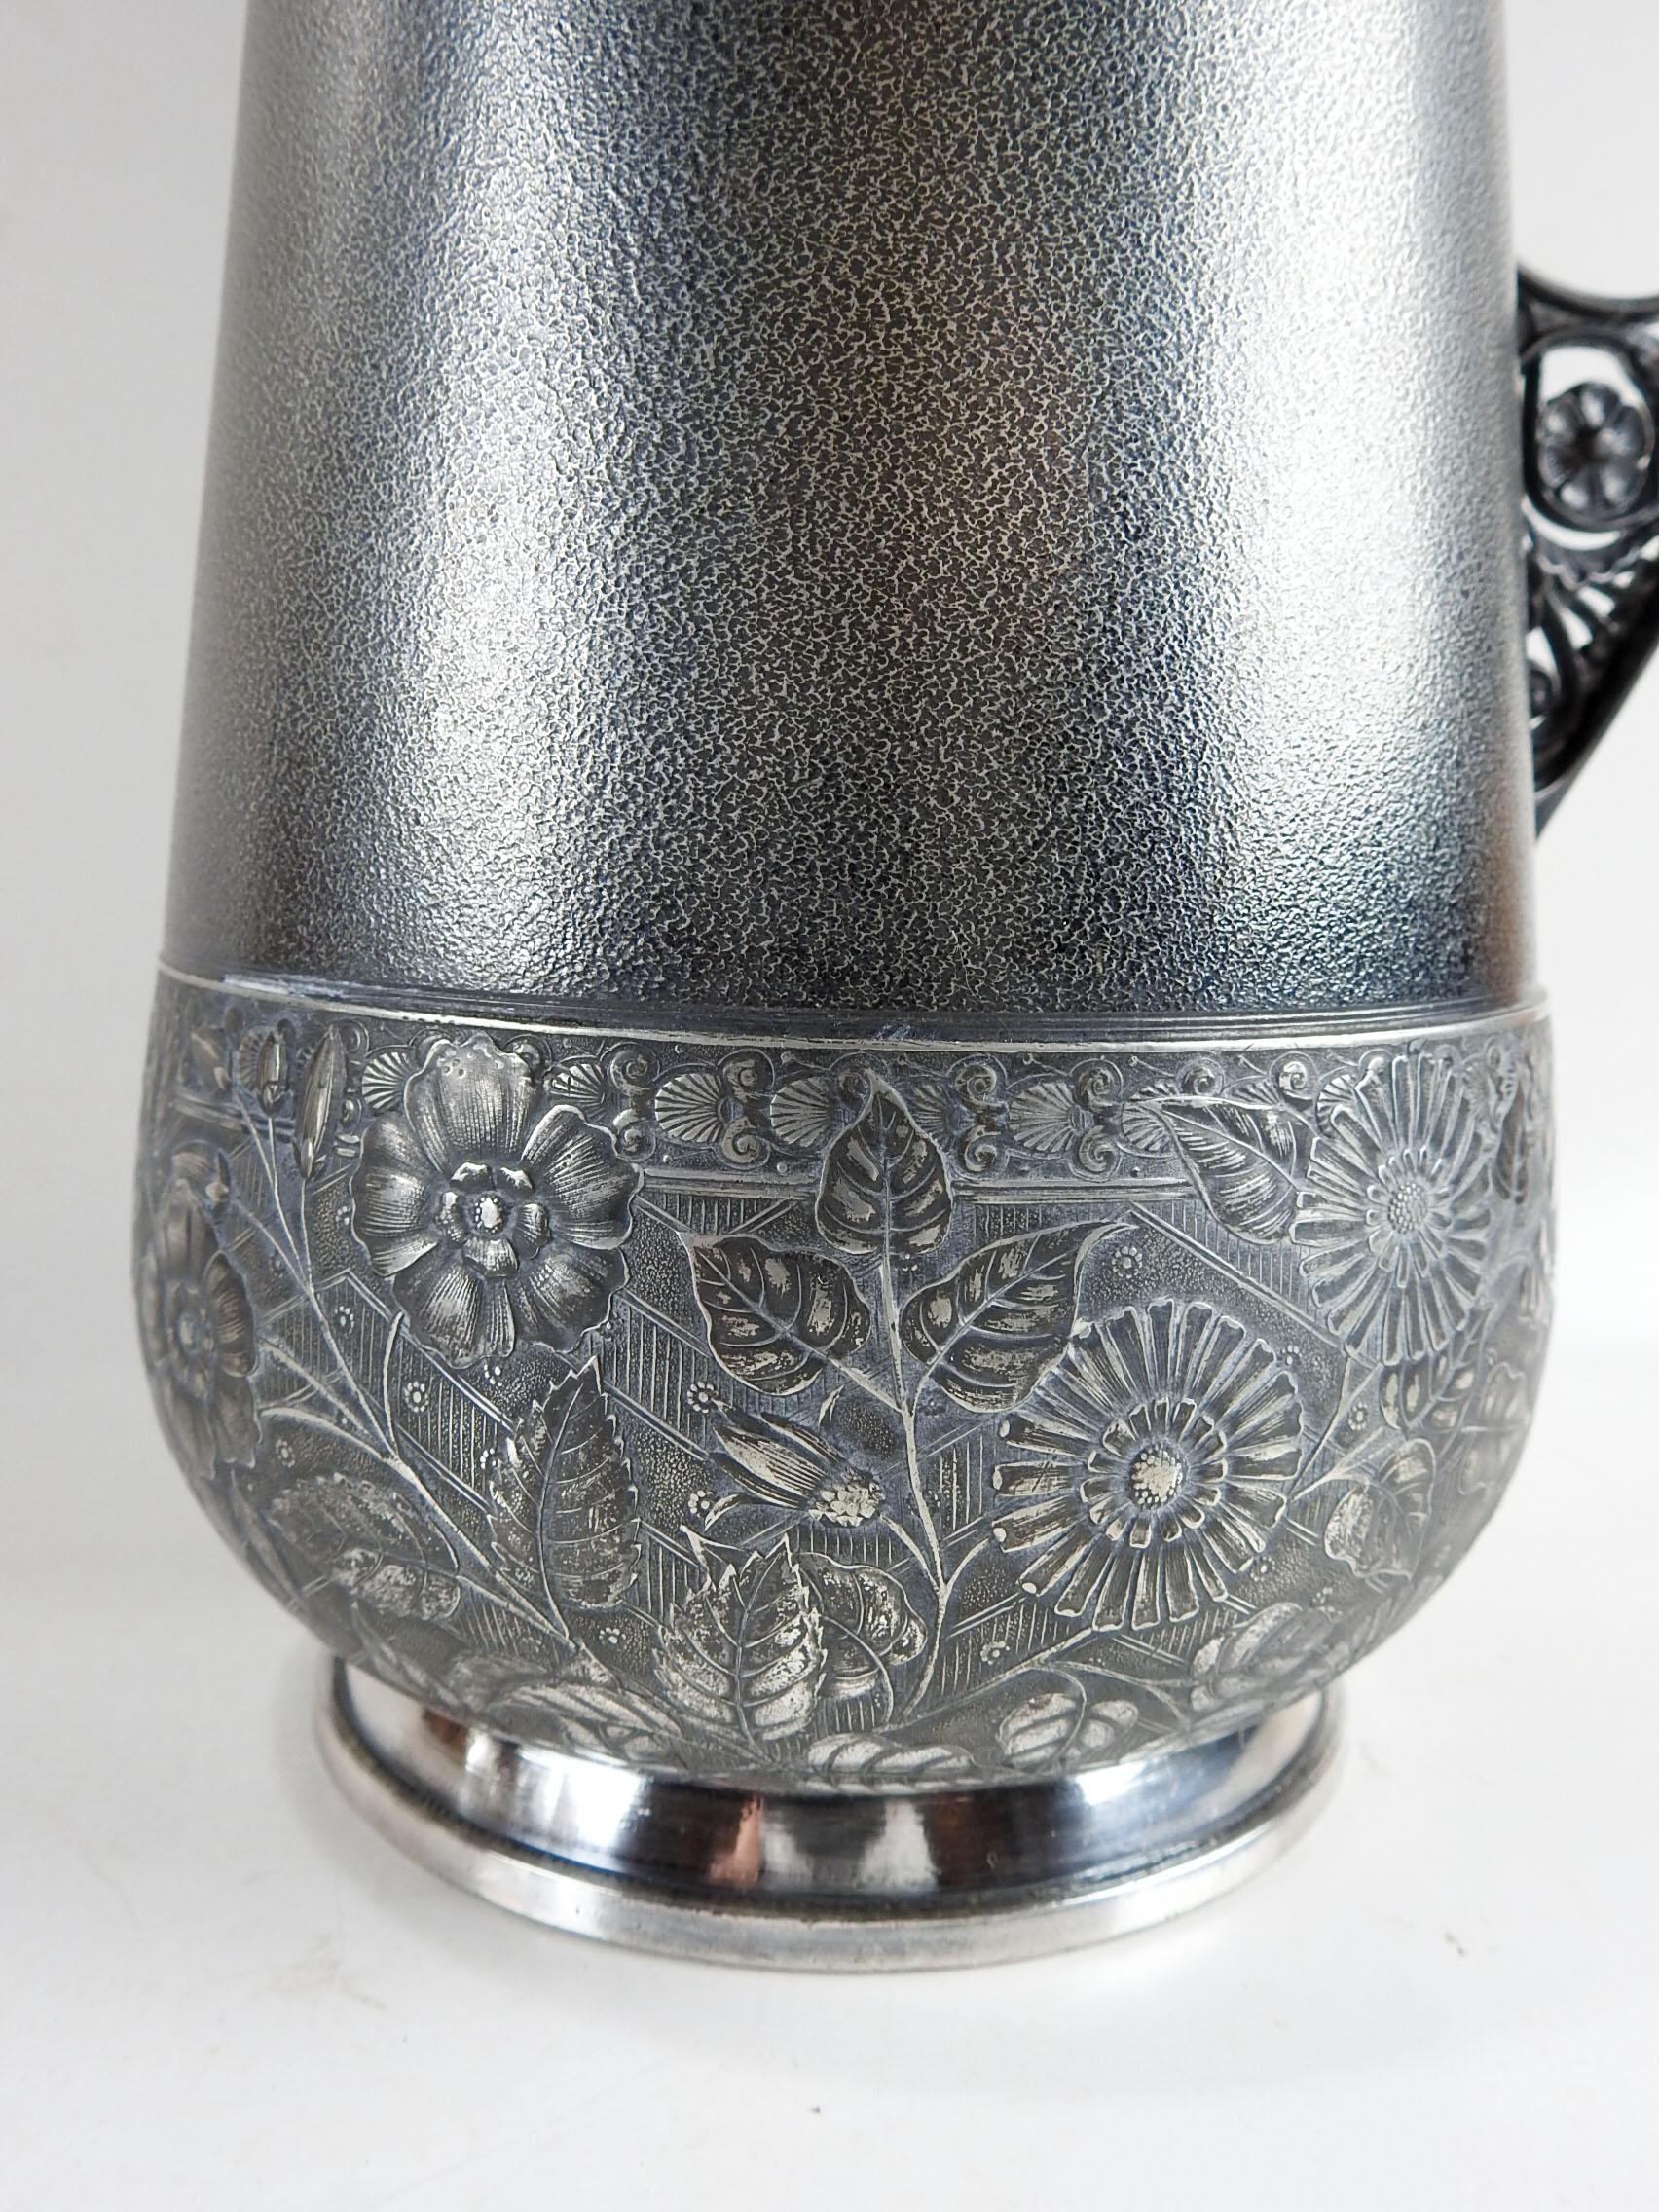 Circa 1880's Aesthetic Movement silverplate pitcher. Handsome original dark patina with floral bands and textured body. Marked Meriten Silver Co. on bottom. Some plate loss on handle.